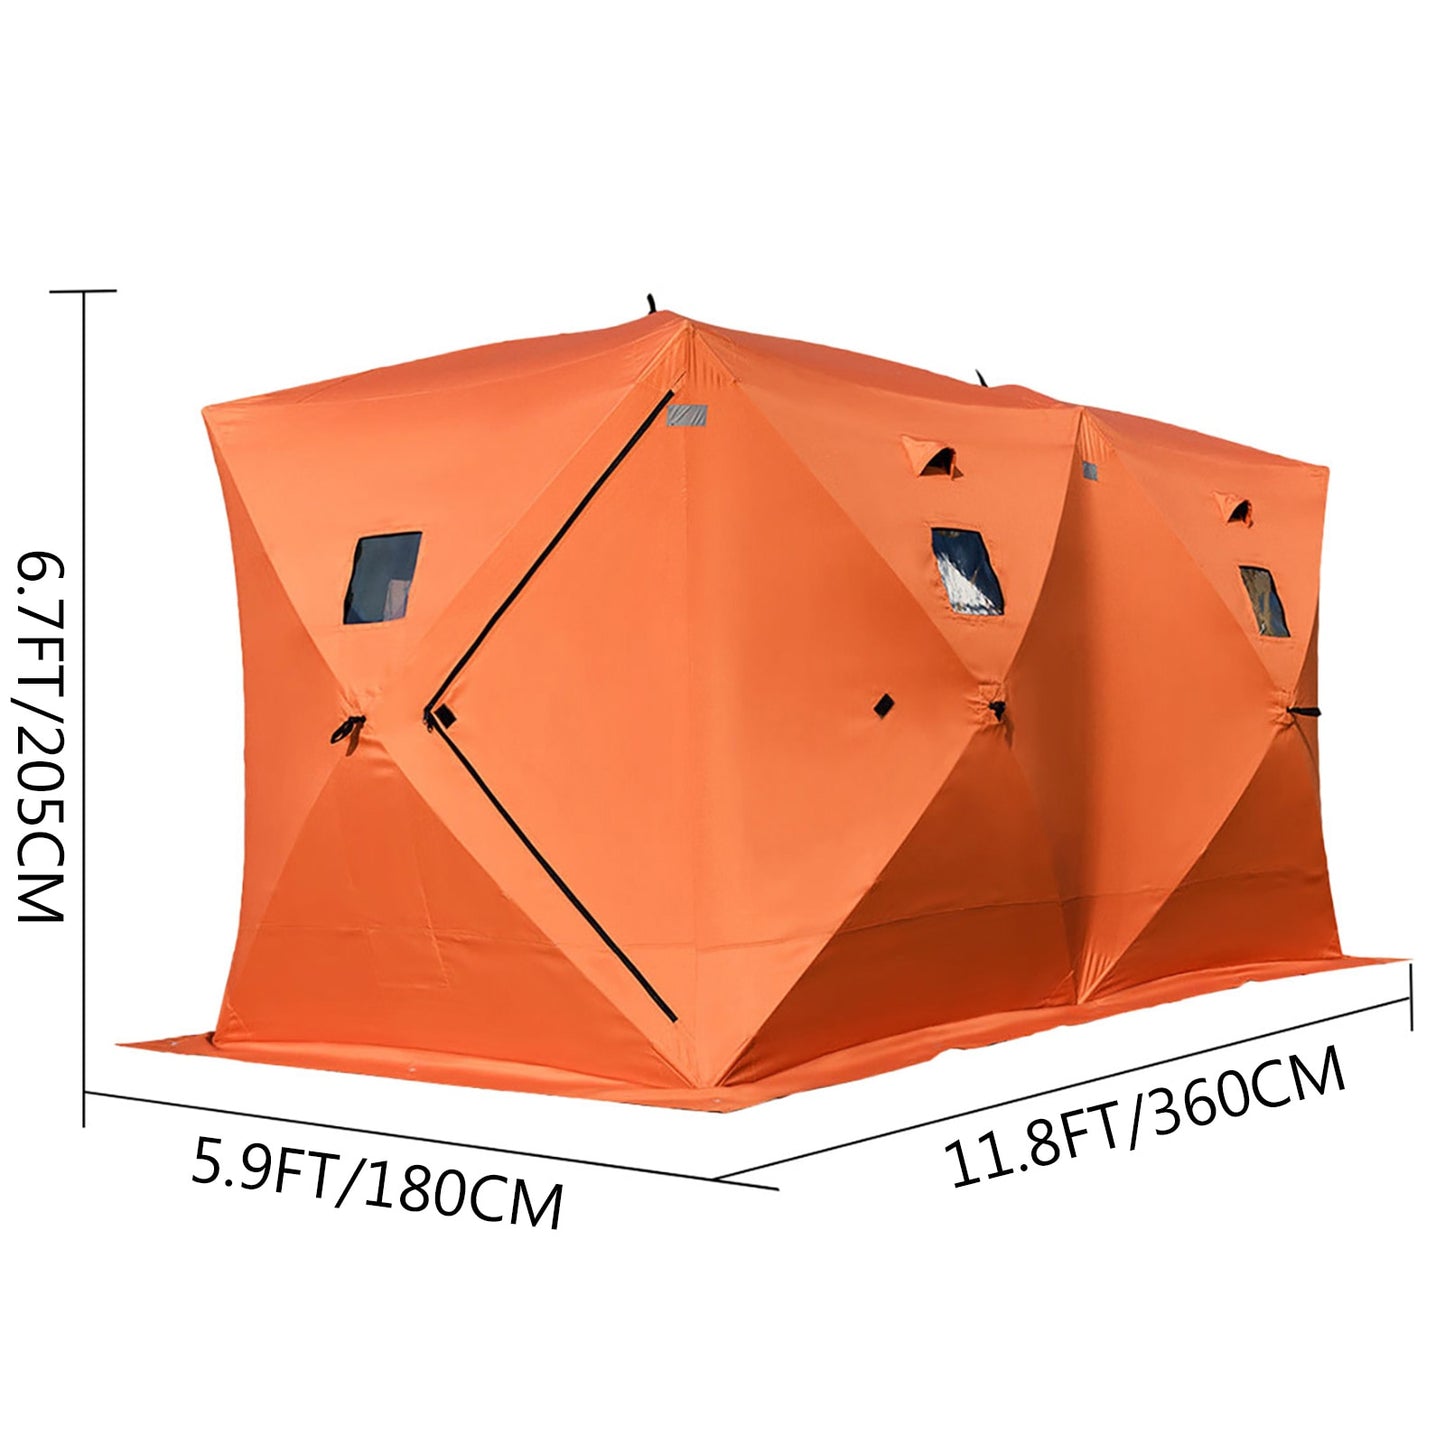 Ice Fishing Tent Warm Winter Large Space Thick Camping Outdoor Windproof Waterproof Snow Ultra large Fishing Camping Tent